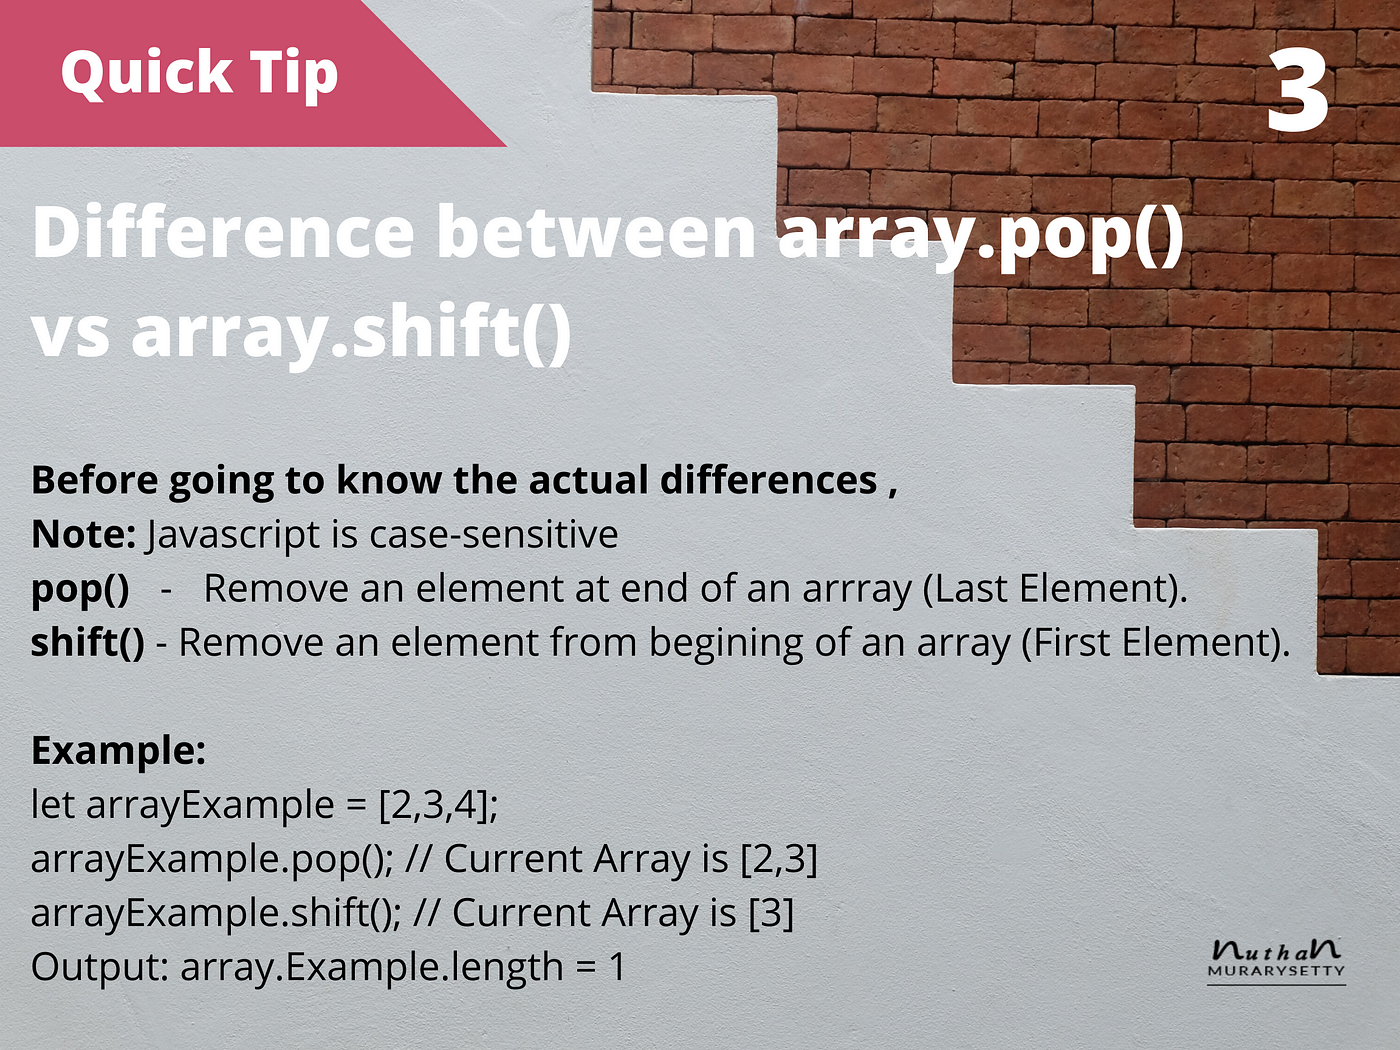 How to use push(), unshift(),pop() and shift() with array in javascript |  by Nuthan Murarysetty | Medium